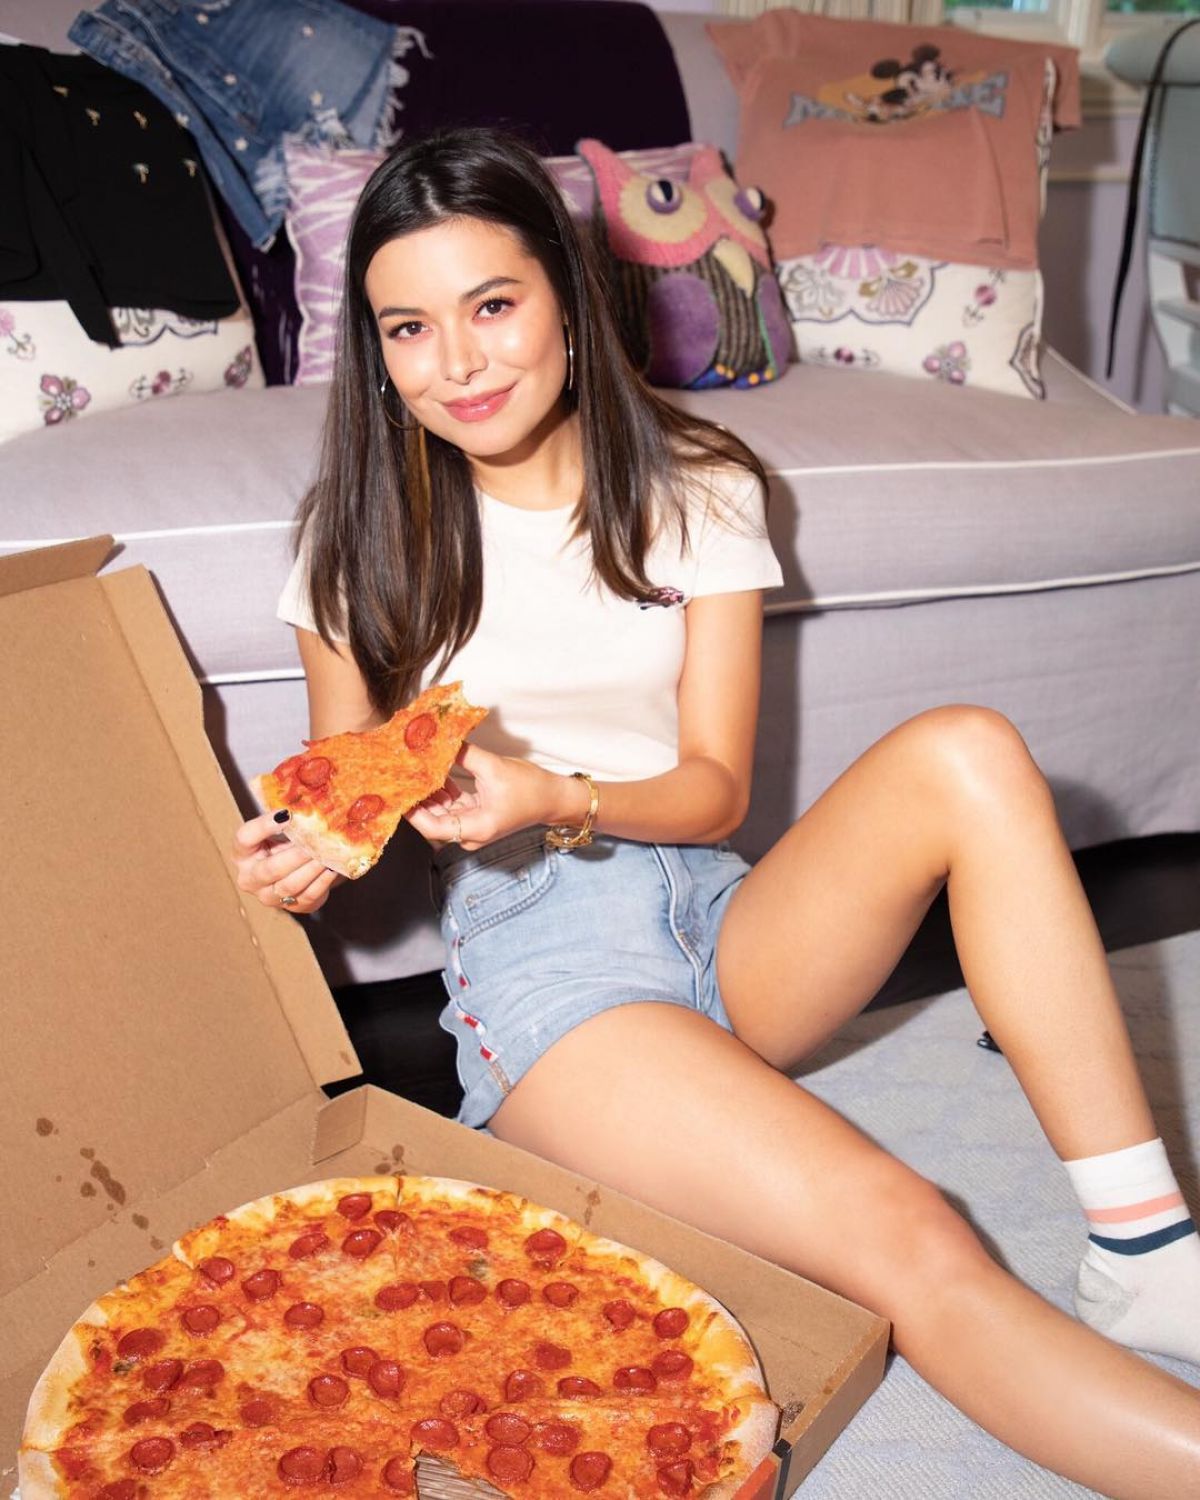 Miranda Cosgrove Prepping to Devour a Huge Pepperoni Pizza on Her Own